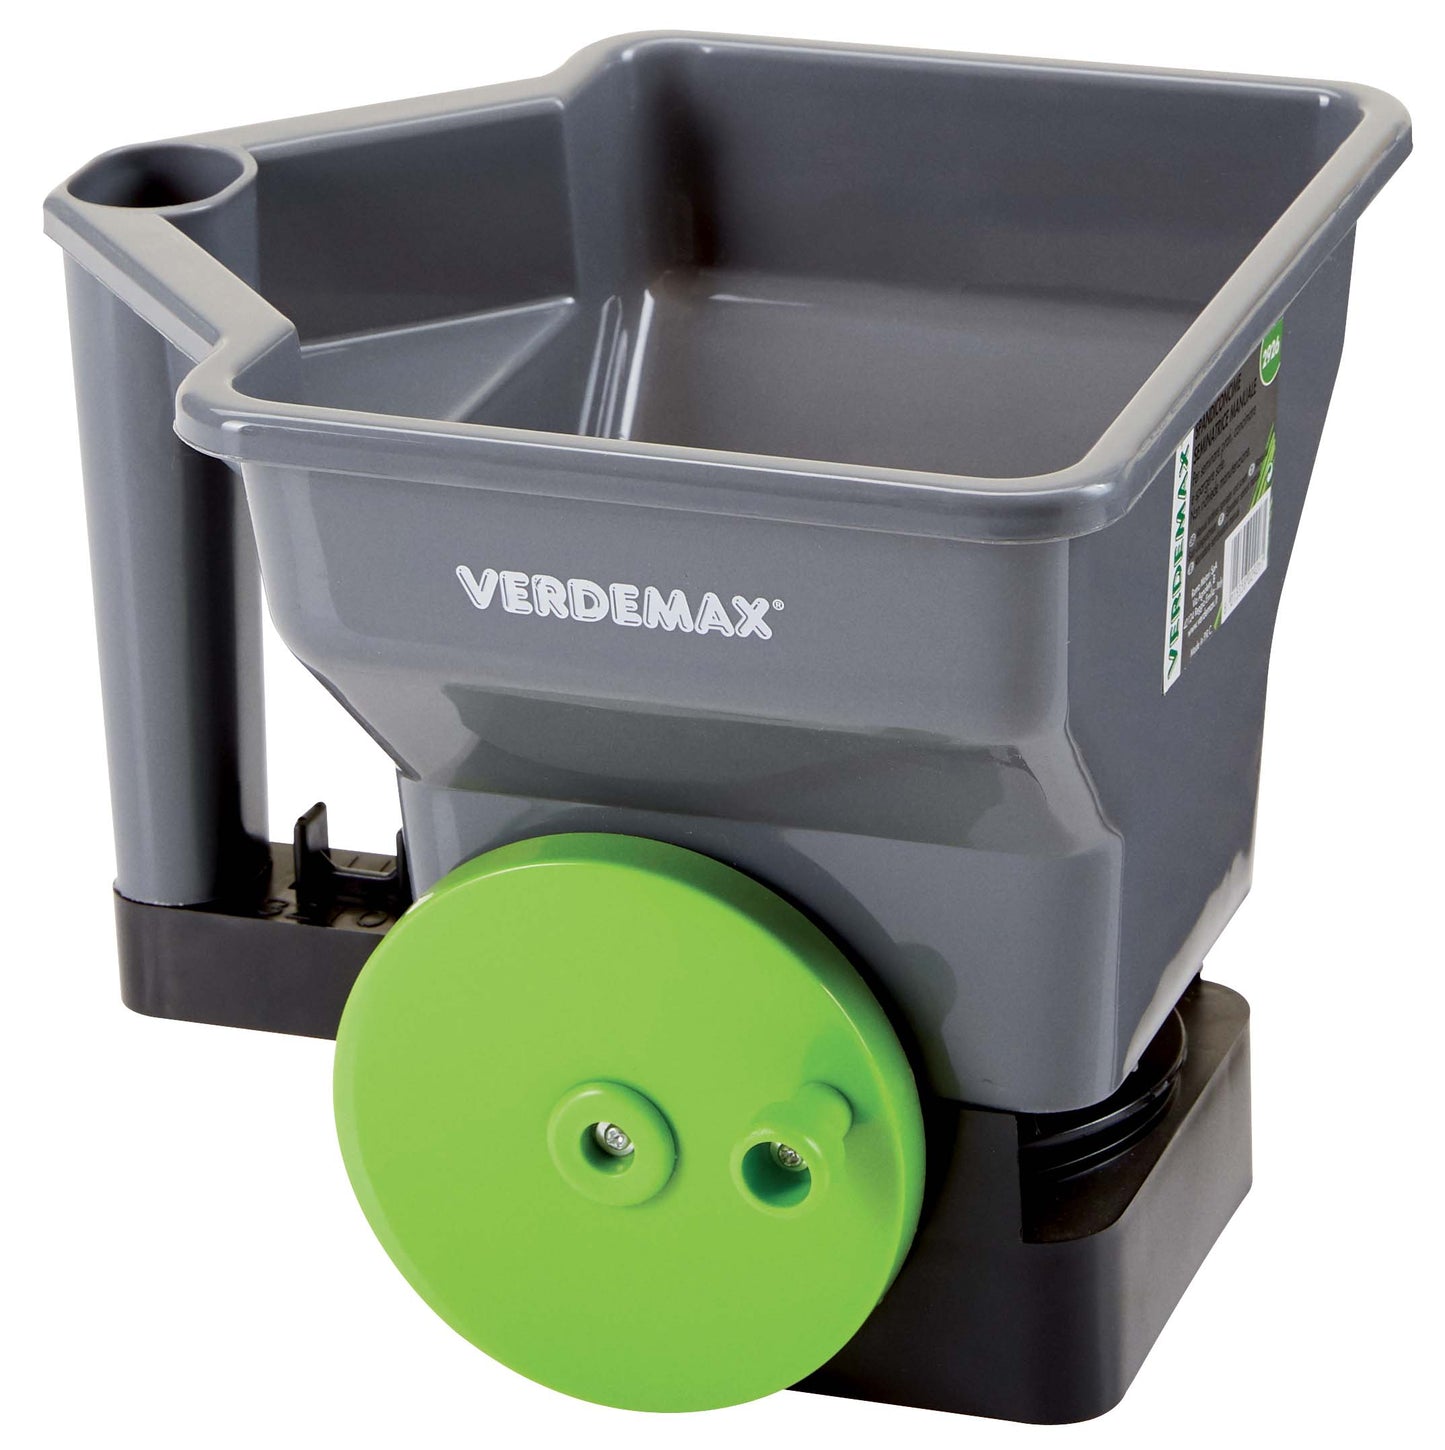 An image showcasing the Verdemax Manual Fertiliser Spreader and Sower, a versatile gardening tool designed for precise and efficient application of fertilizers in the garden. The spreader features a durable construction and ergonomic design for ease of use and optimal distribution of fertilizers across your garden beds